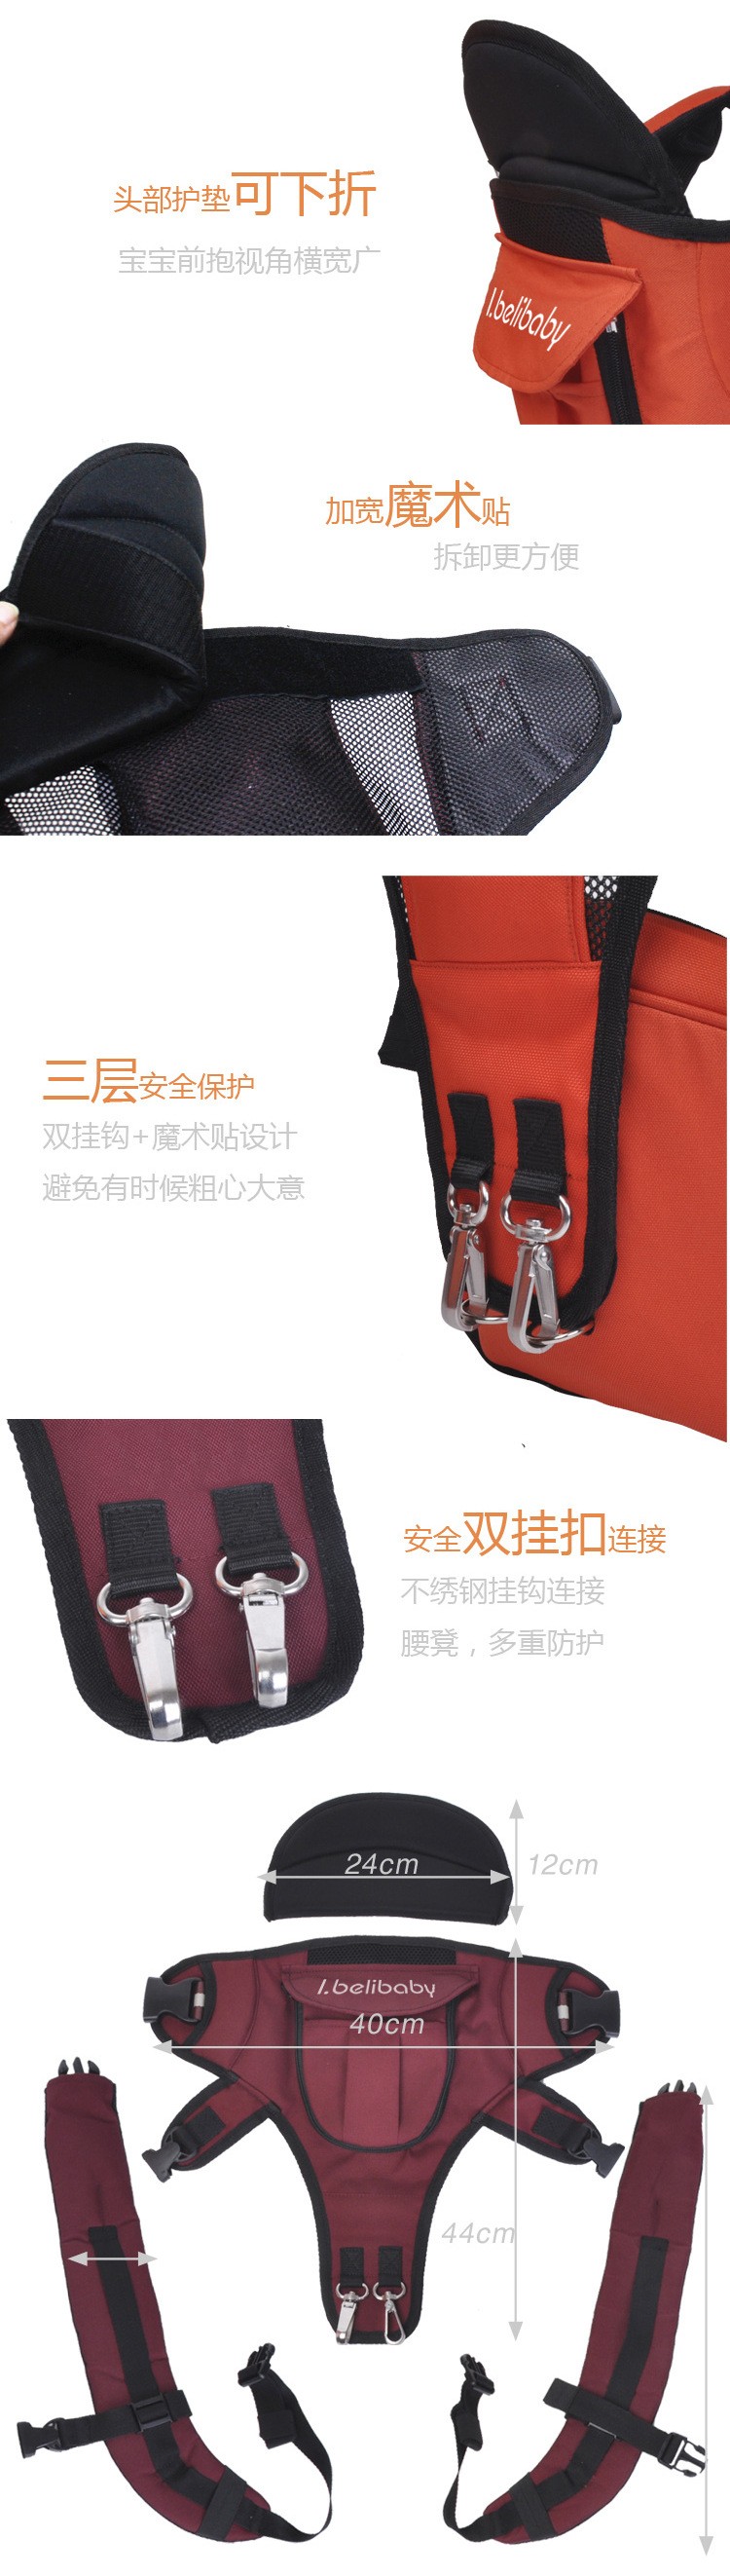 Baby Carrier (12)